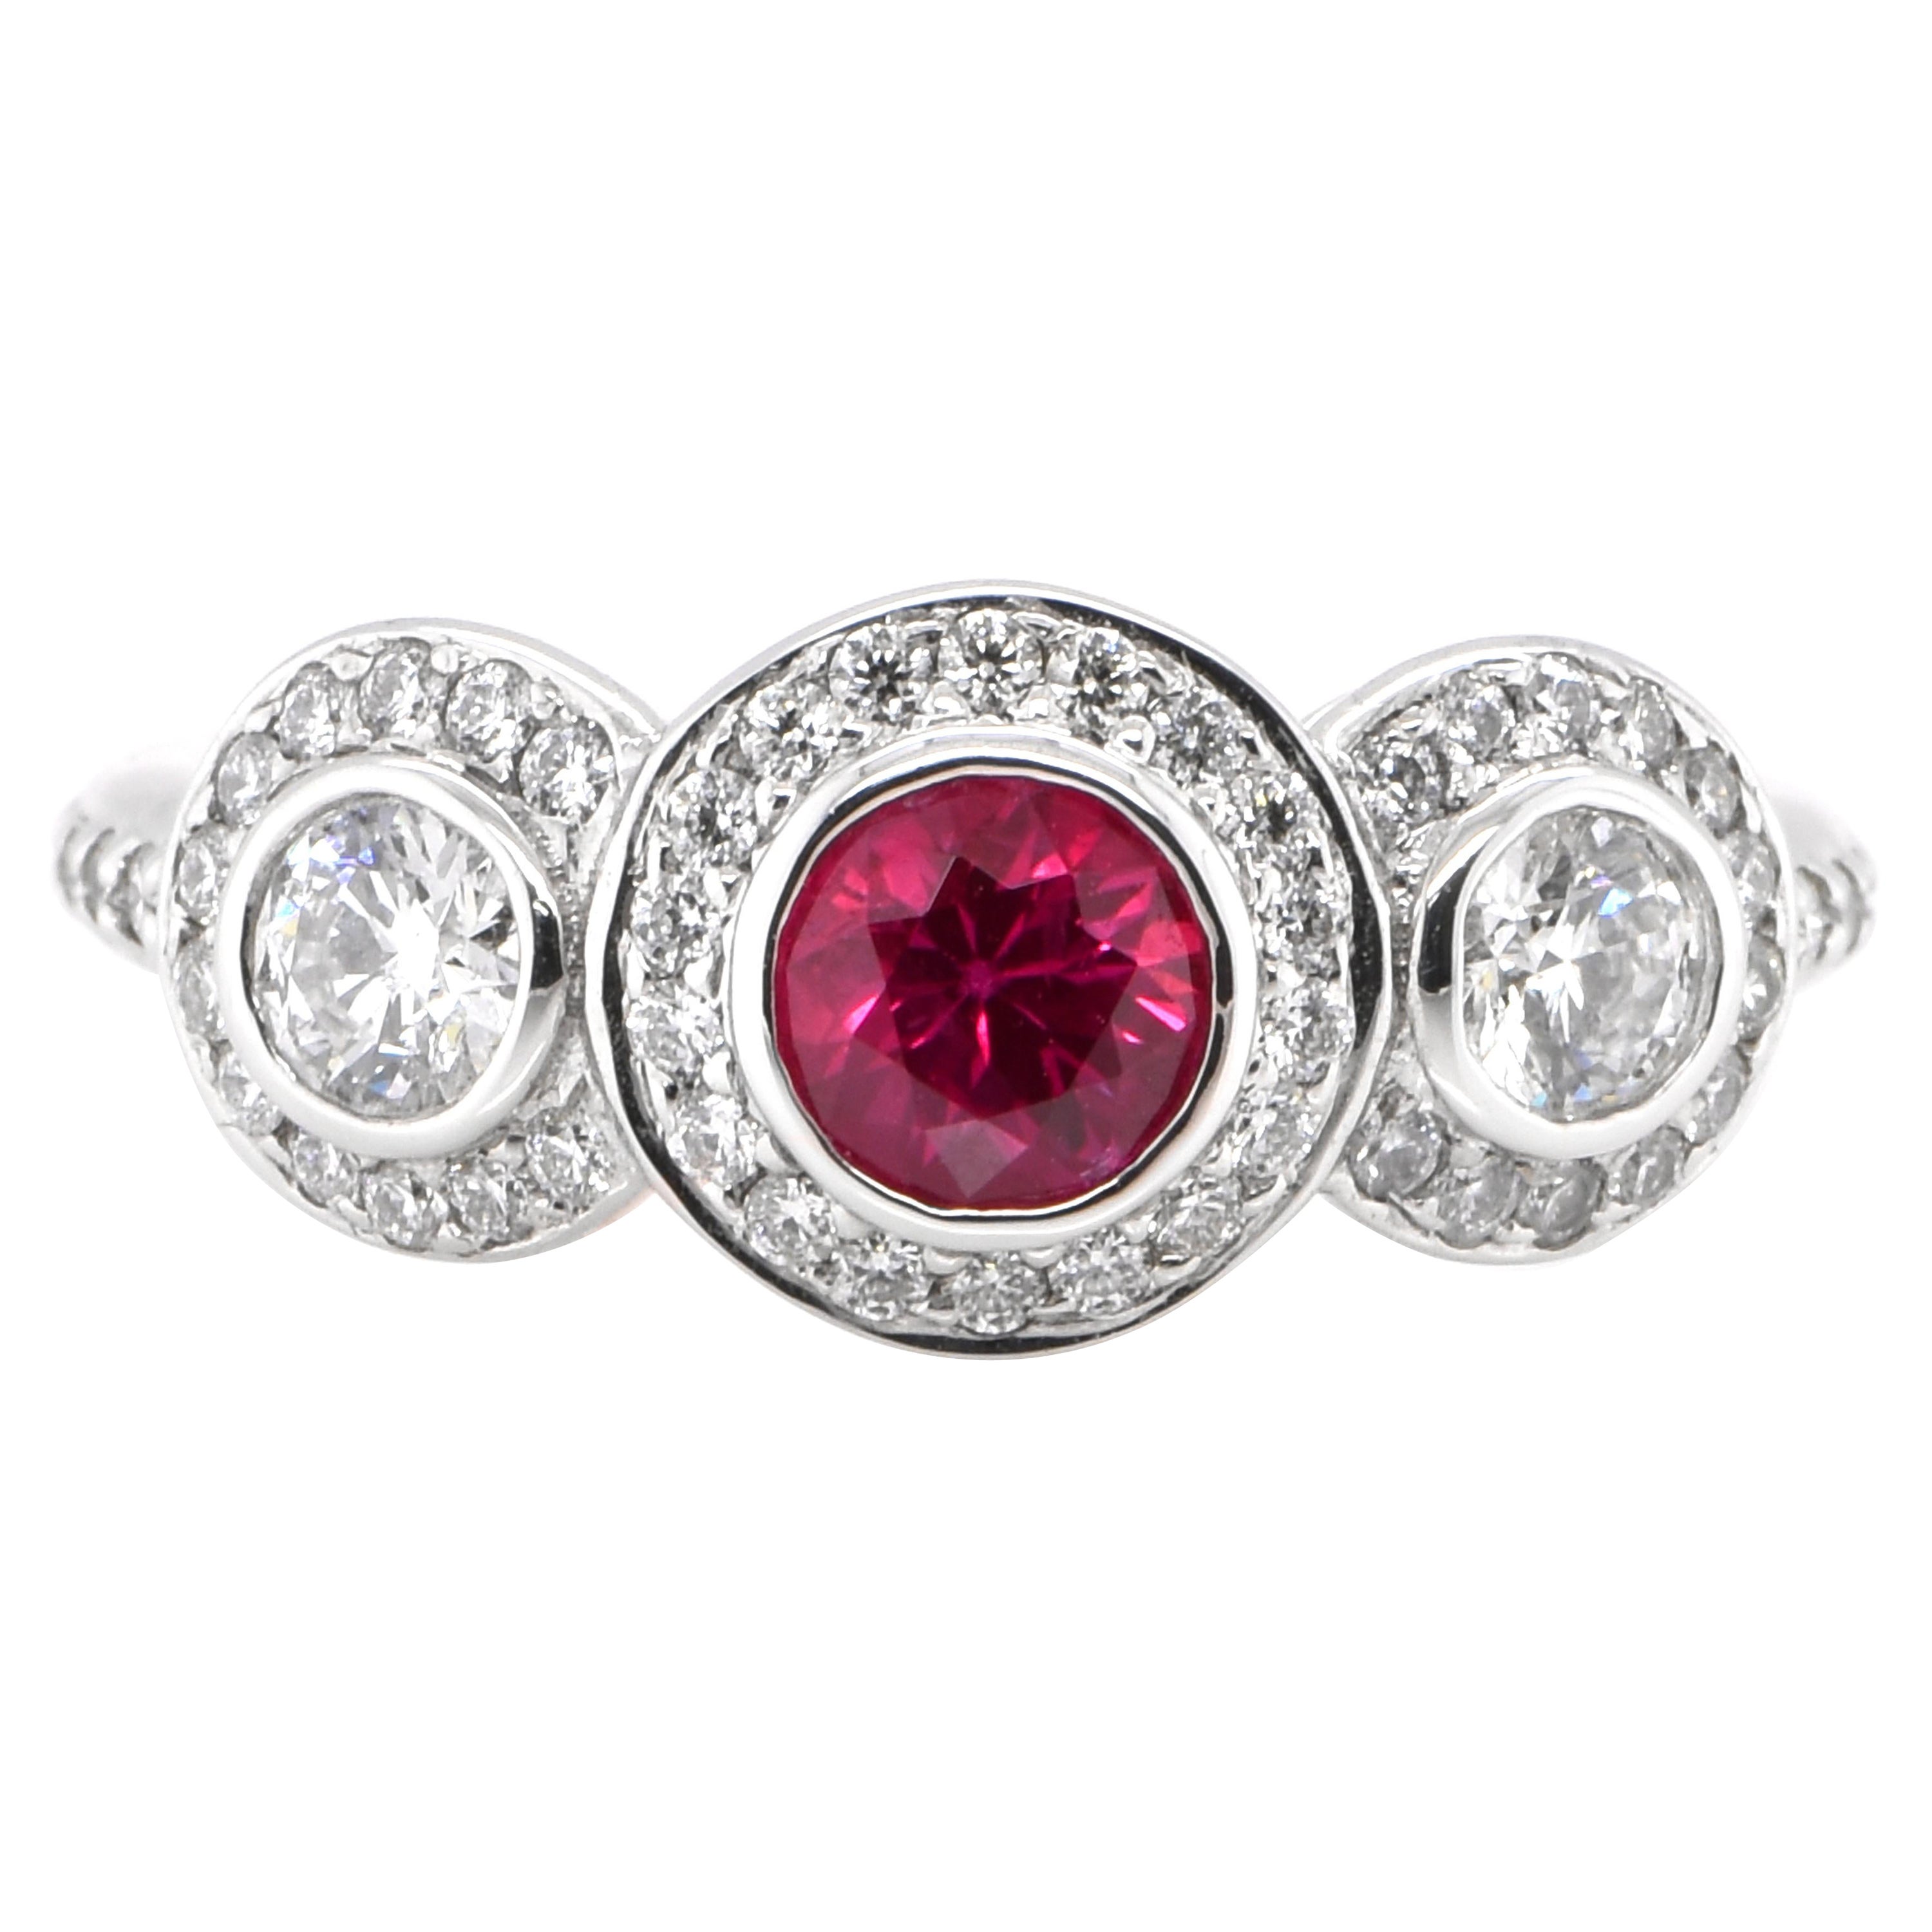 GIA Certified 0.67 Carat Burmese Ruby and Diamond Ring Set in 18k Gold For Sale